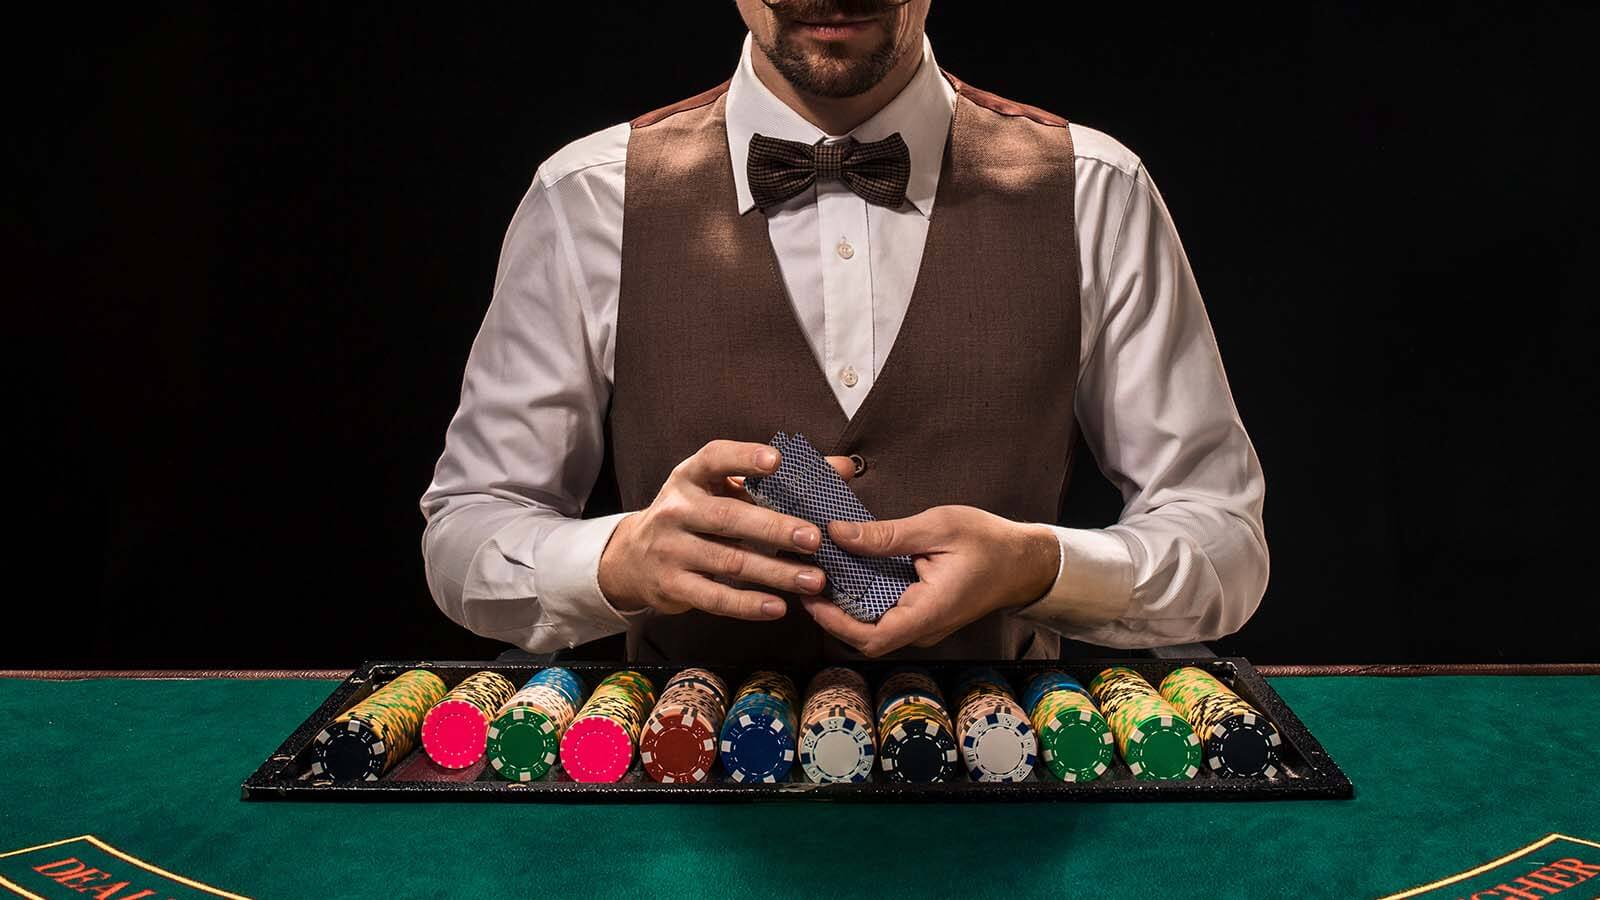 How to Play Baccarat Like an Expert